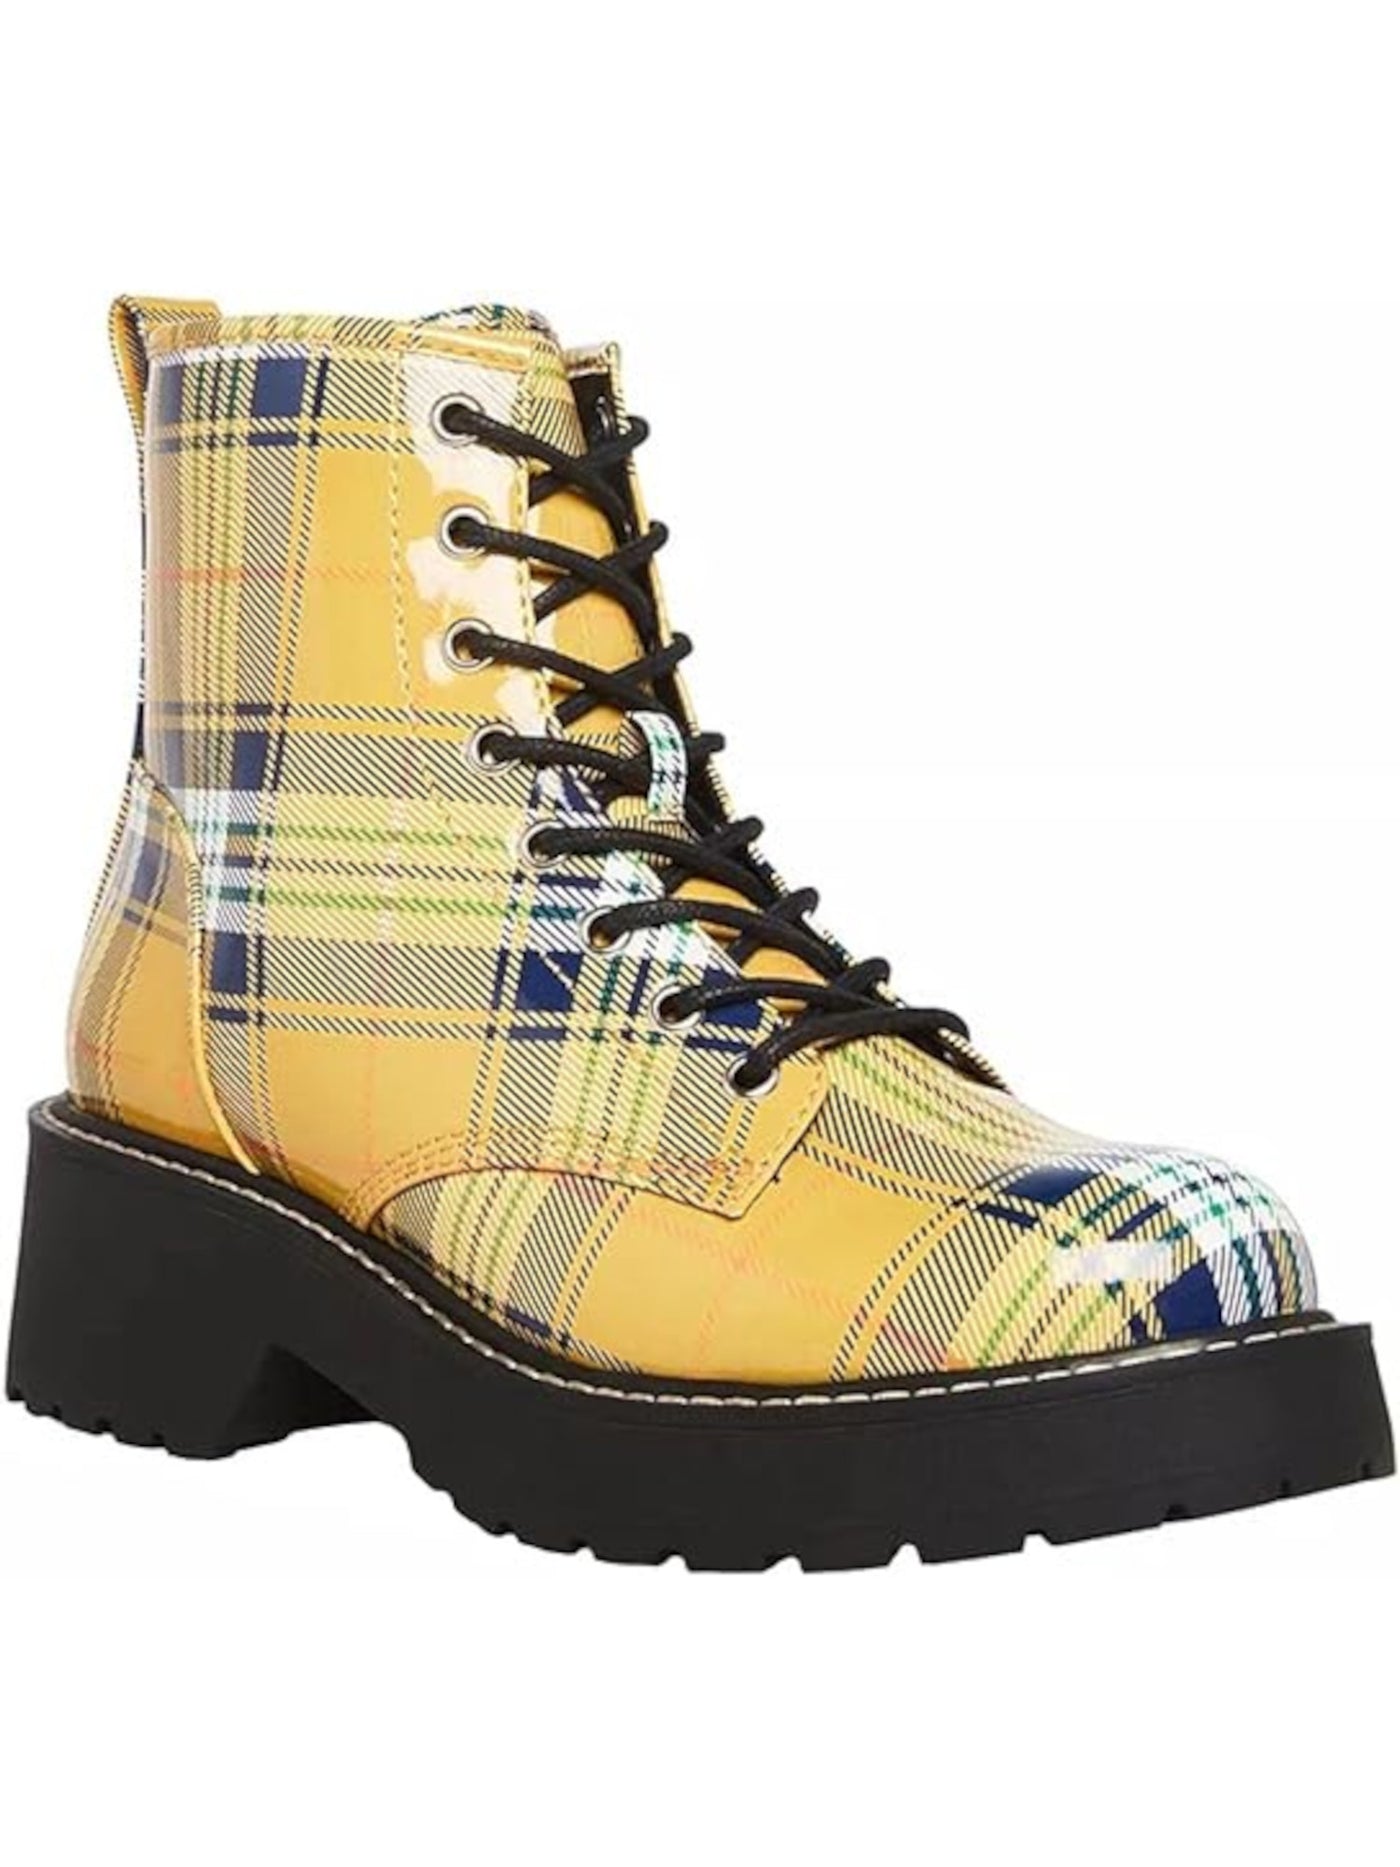 MADDEN GIRL Womens Yellow Plaid Lace-Up Pull-Tab Lug Sole Padded Carra Round Toe Block Heel Zip-Up Combat Boots 9.5 M